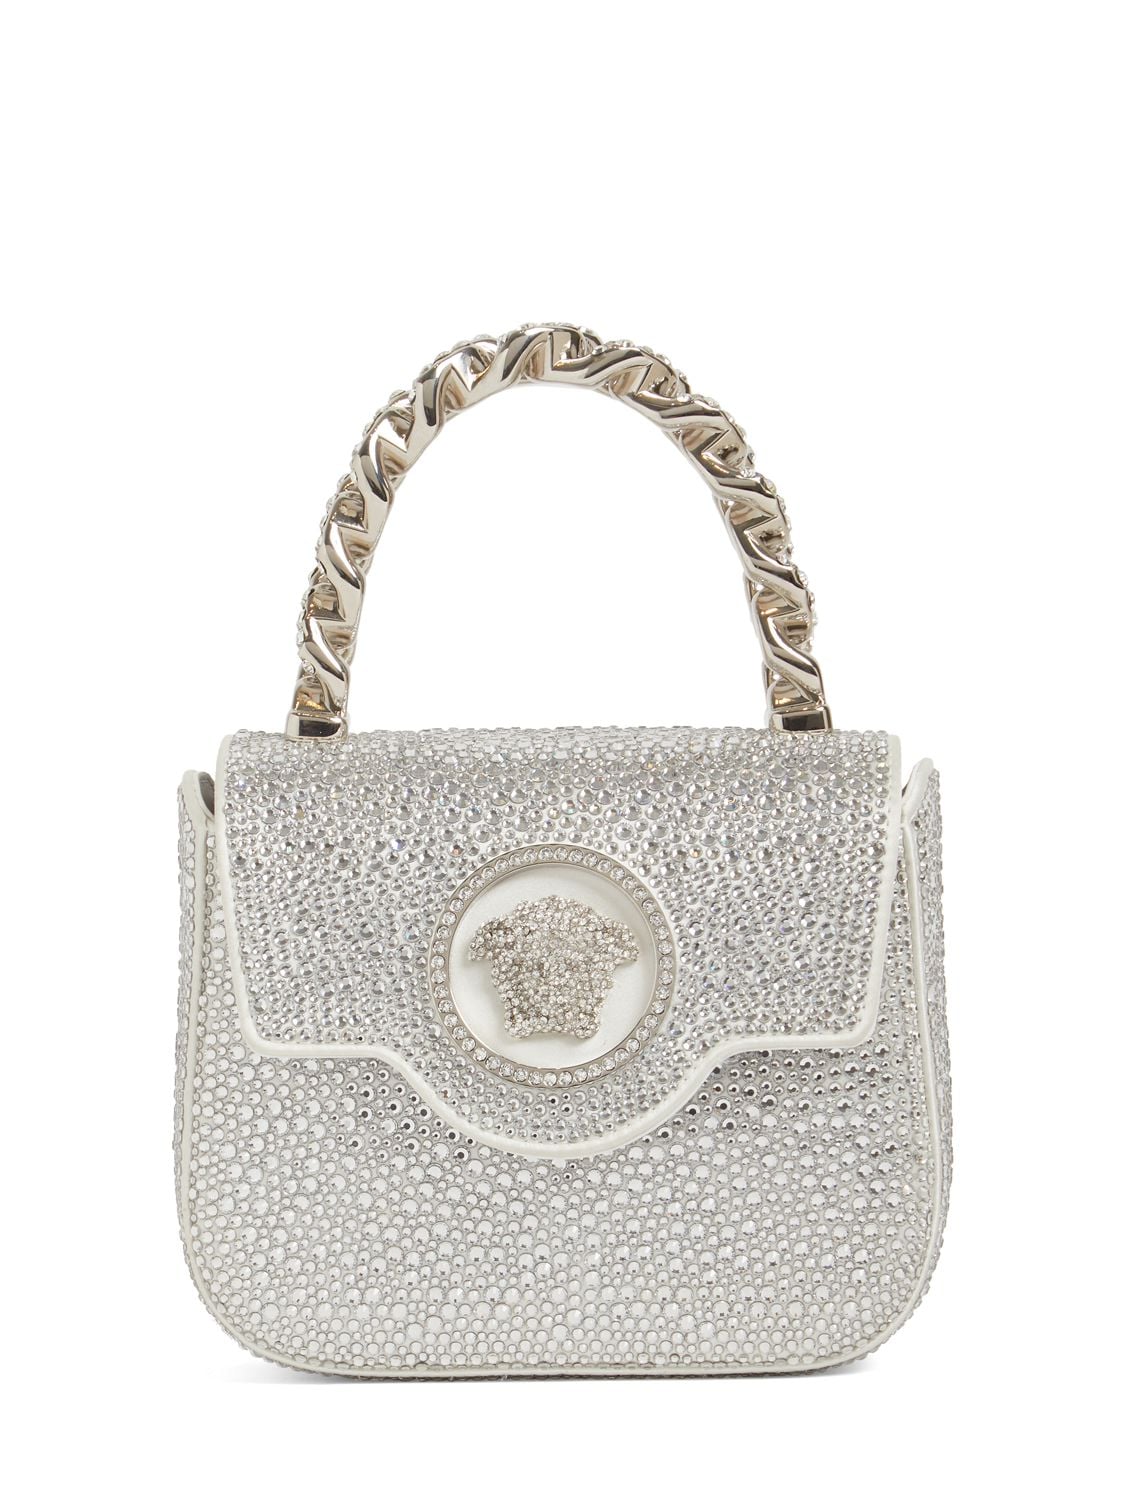 Image of Satin & Strass Leather Top Handle Bag